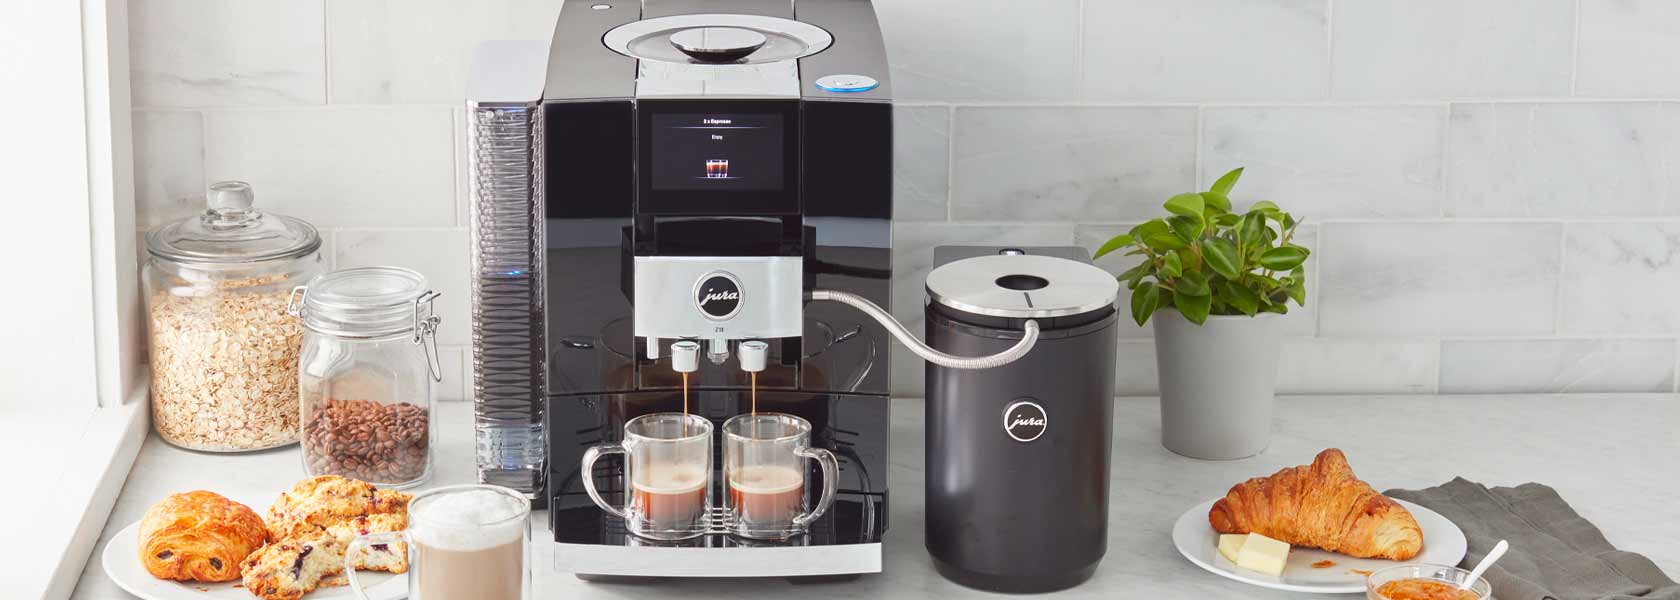 Jura Z10 coffee and espresso maker with frother